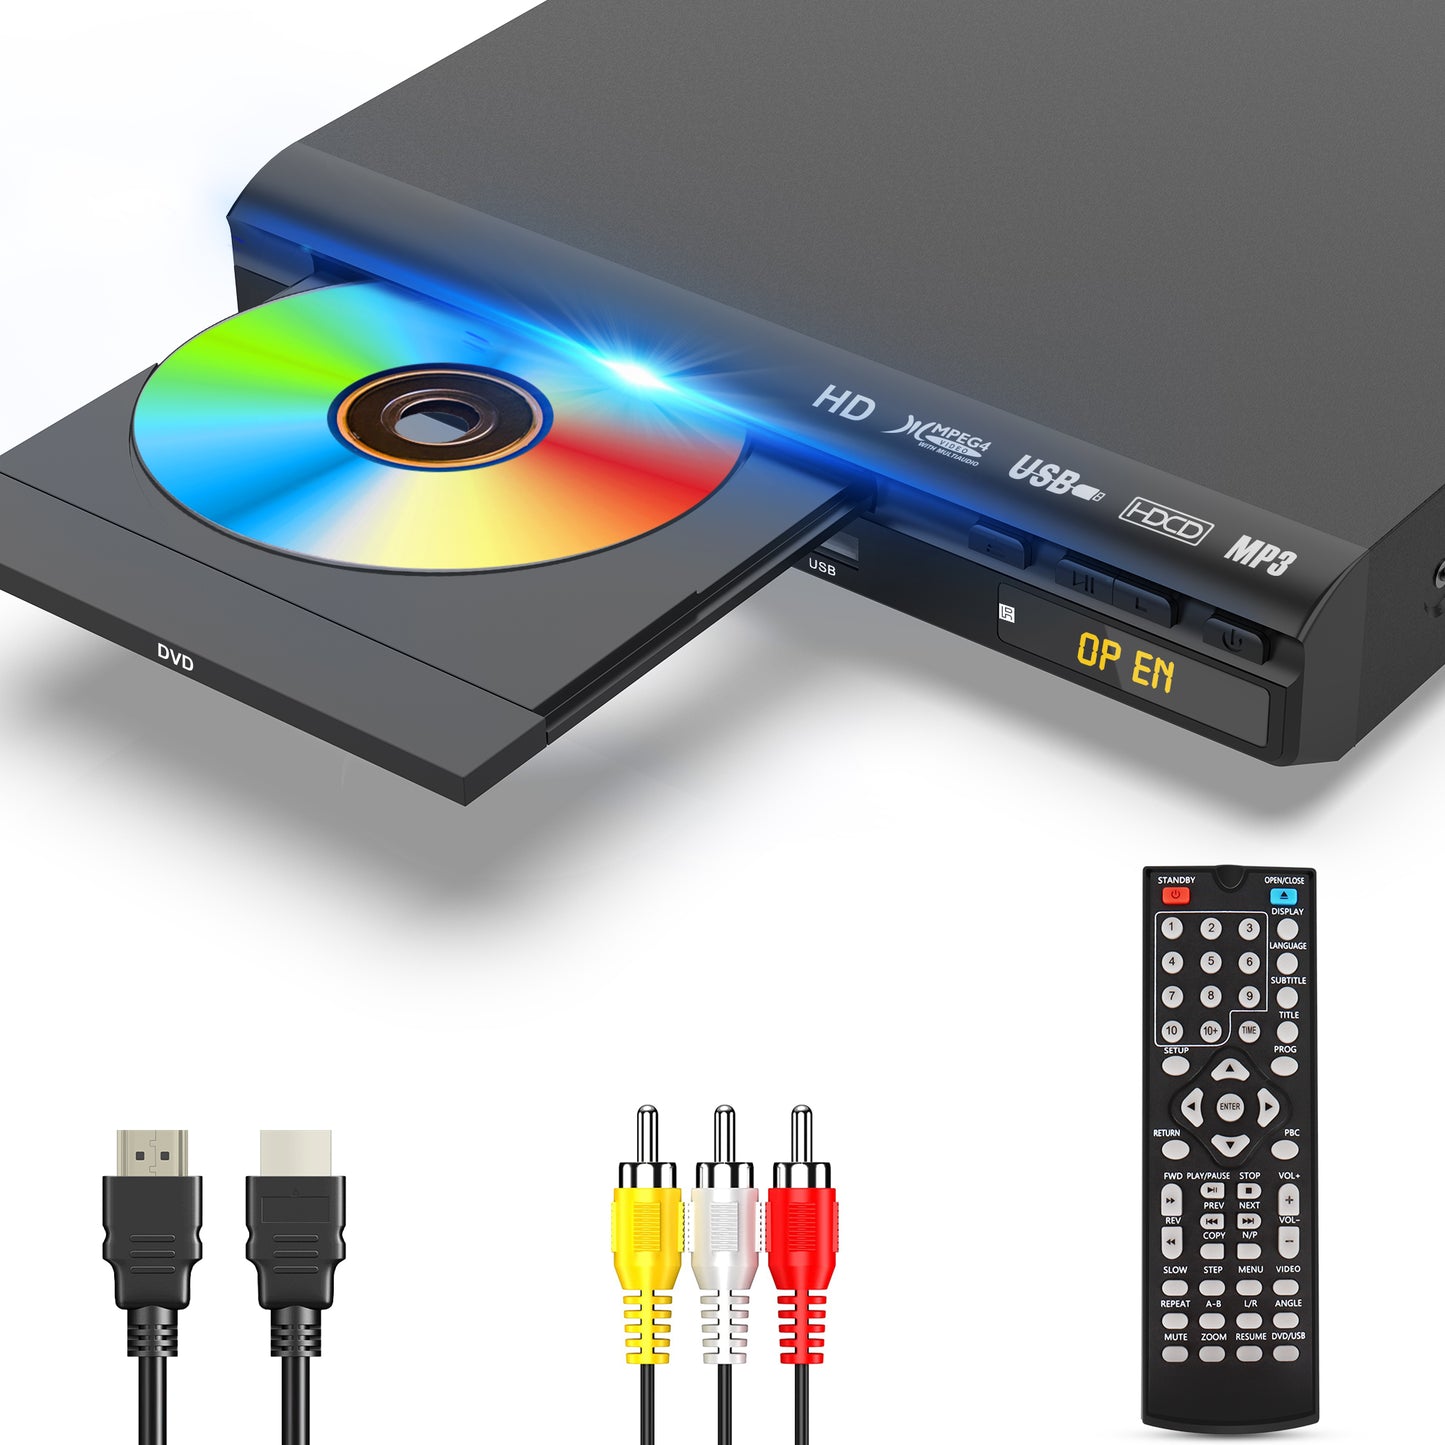 WONNIE HD DVD Player for TV, CD Players for Home with HD/AV/Coaxial Output &USB Input, Built in PAL/NTSC System, HDMI/AV Cable and Full Function Remote Control Included